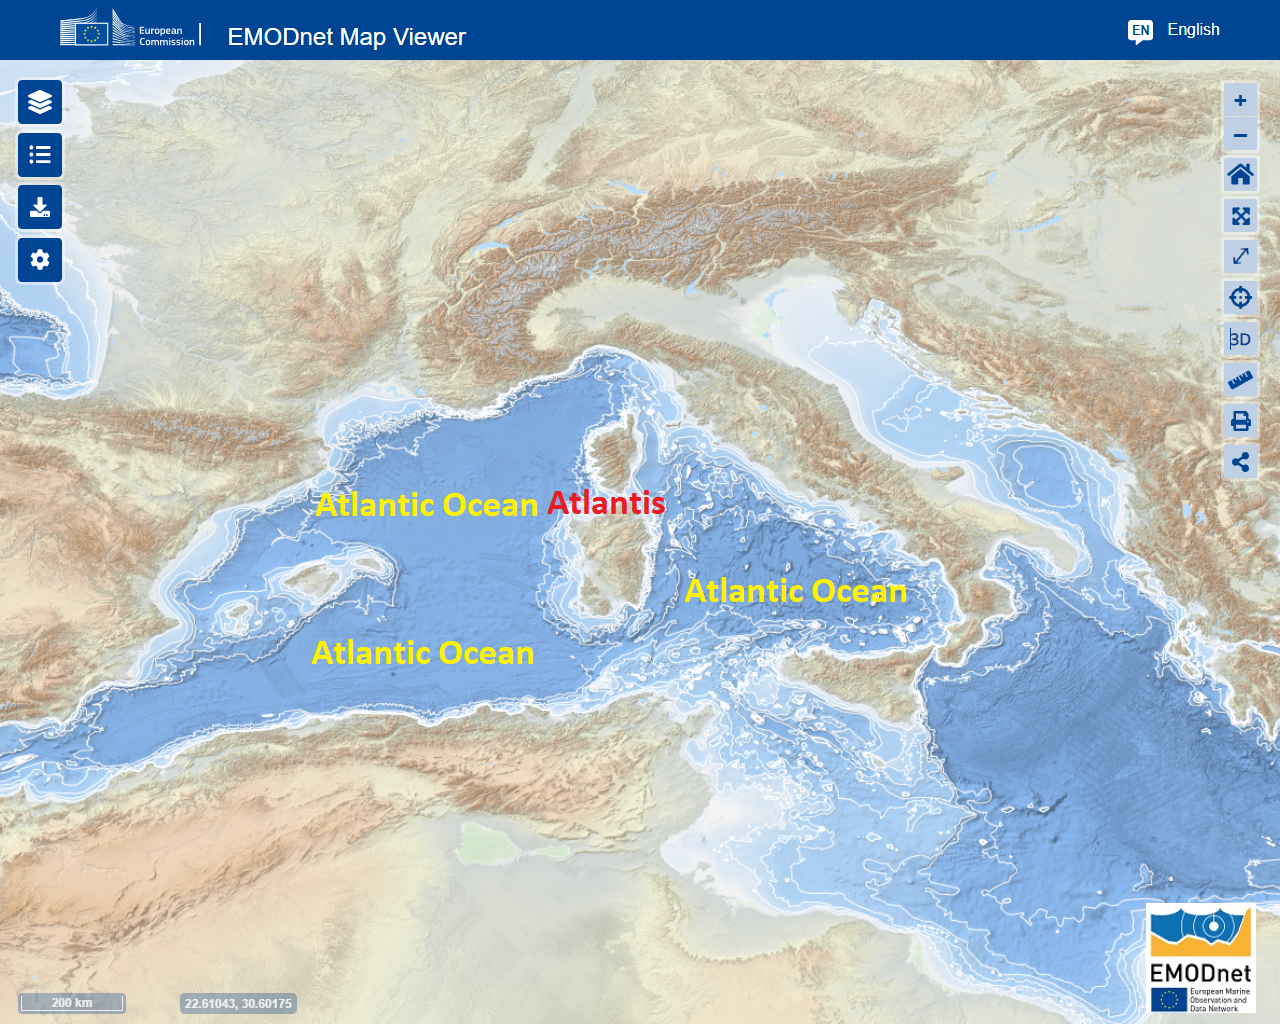 The Pillars of Hercules in the ancient Atlantic Ocean, later renamed Mare Nostrum by the Romans.